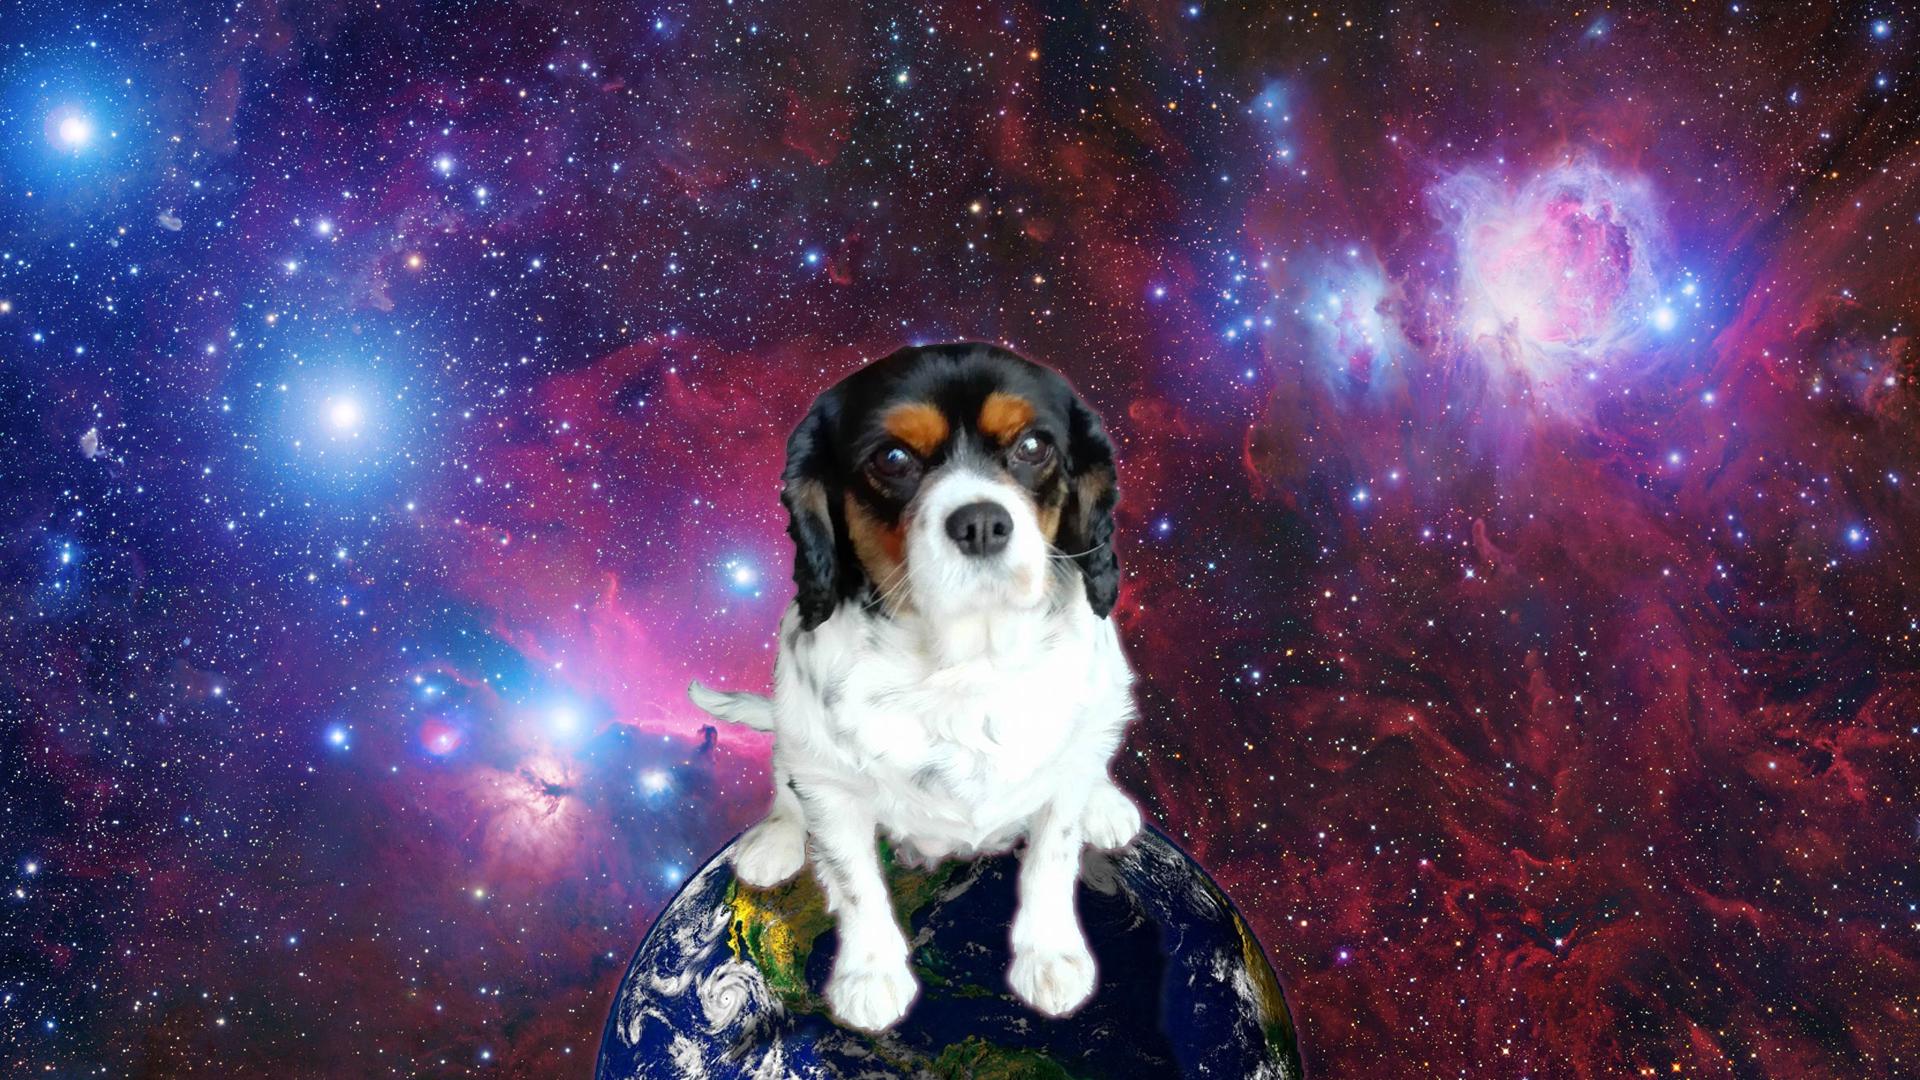 Dogs in Space Wallpaper. Awesome Space